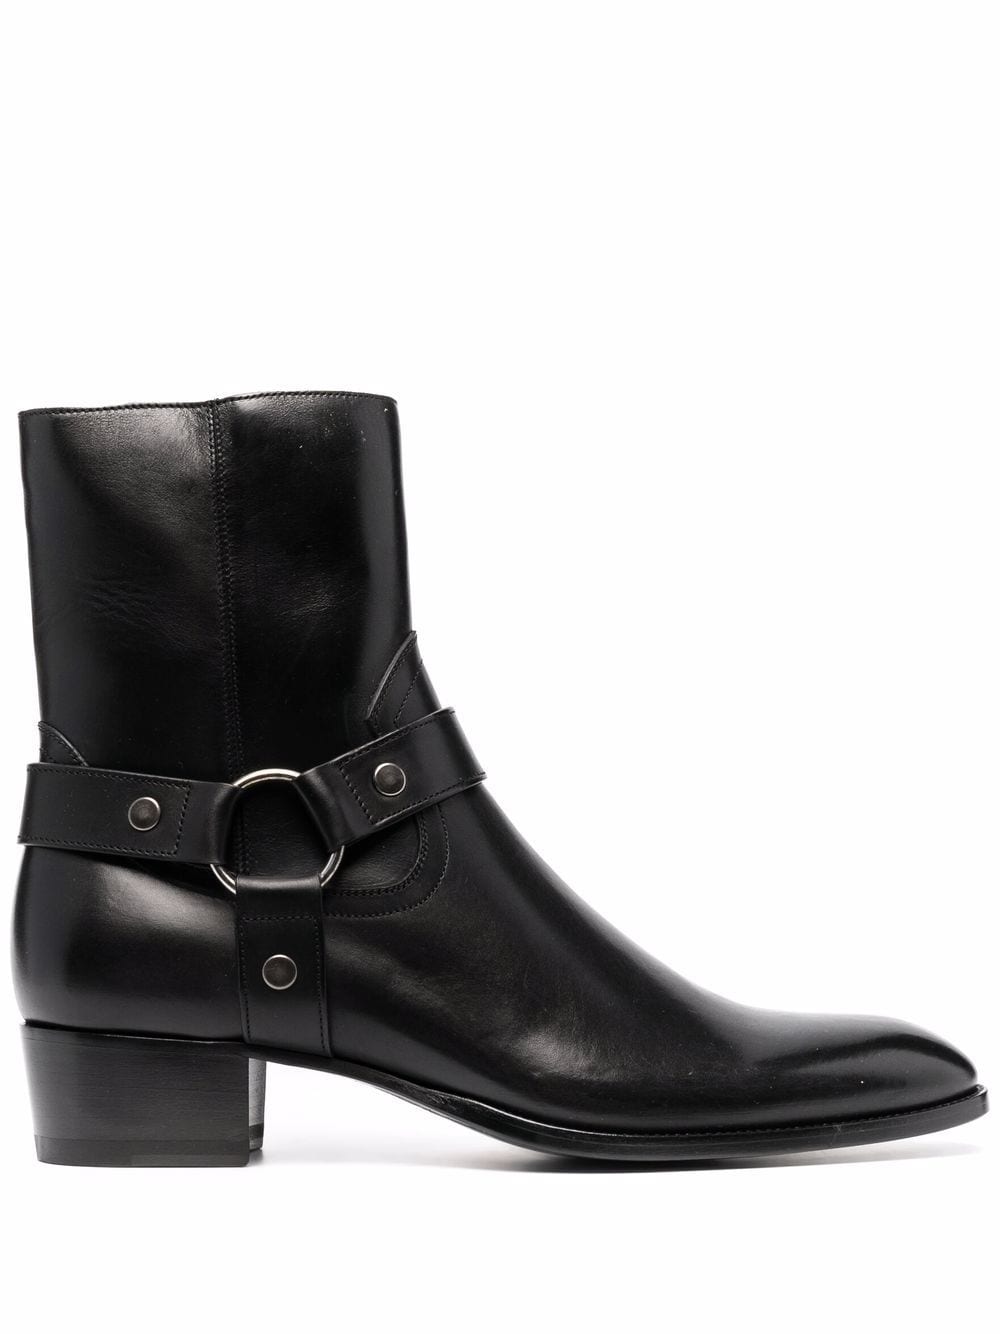 Men's Black Leather Ankle Boots with Harness Detail